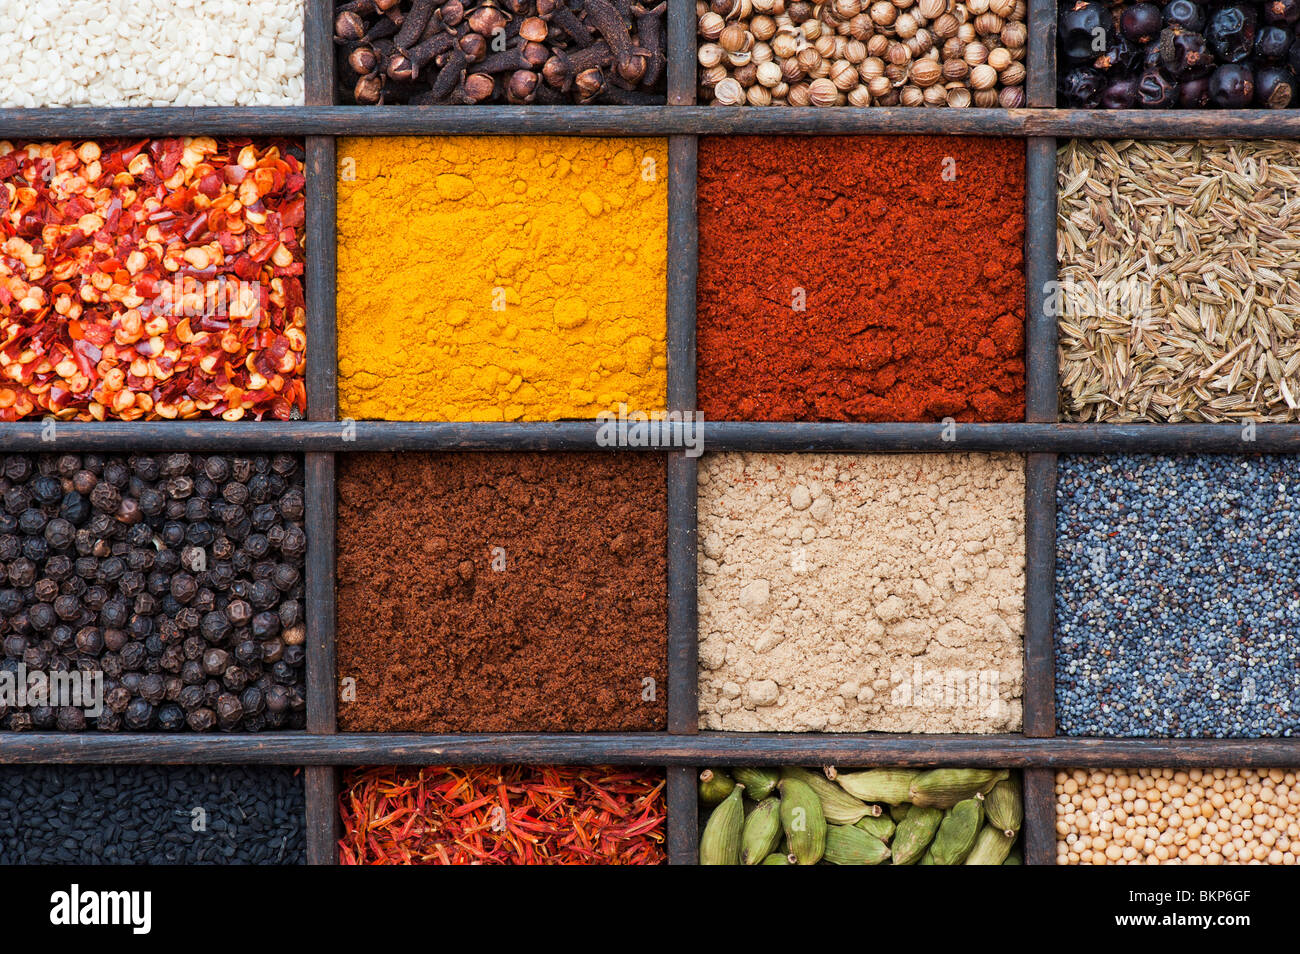 Indian spices in an old wooden tray. Flat lay photography from above Stock Photo